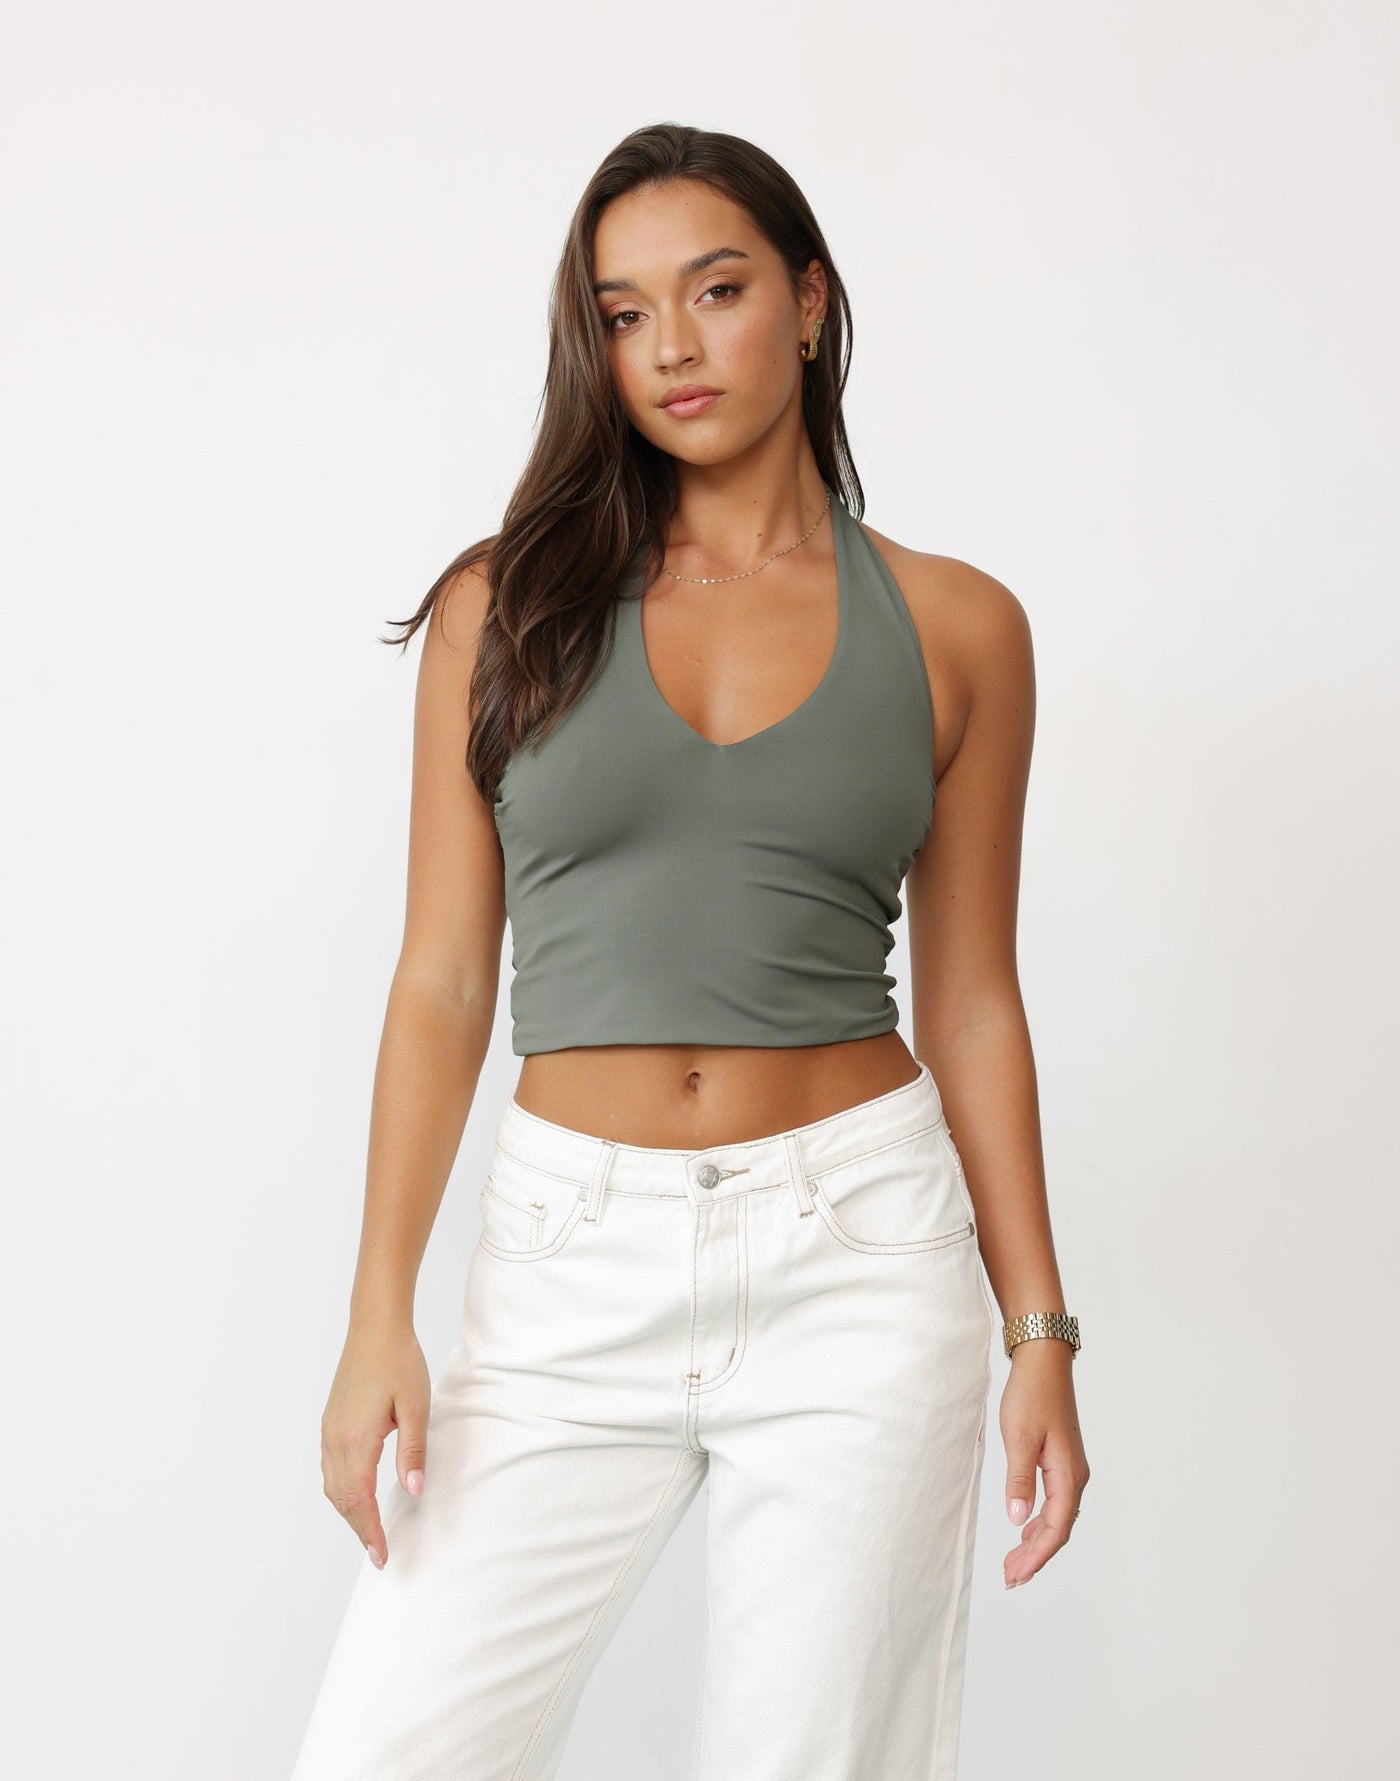 Amira Top (Khaki) - V-neck Cropped Bodycon Ruched Side Top - Women's Top - Charcoal Clothing